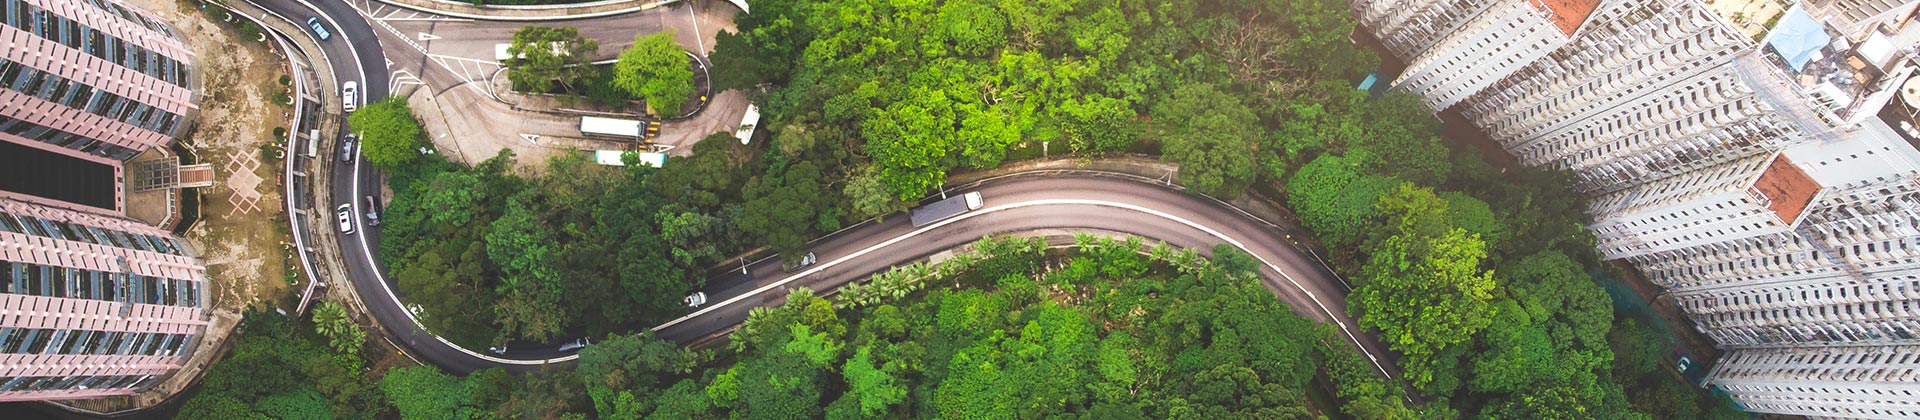 Aerial shot of a road surrounded by trees and buildings